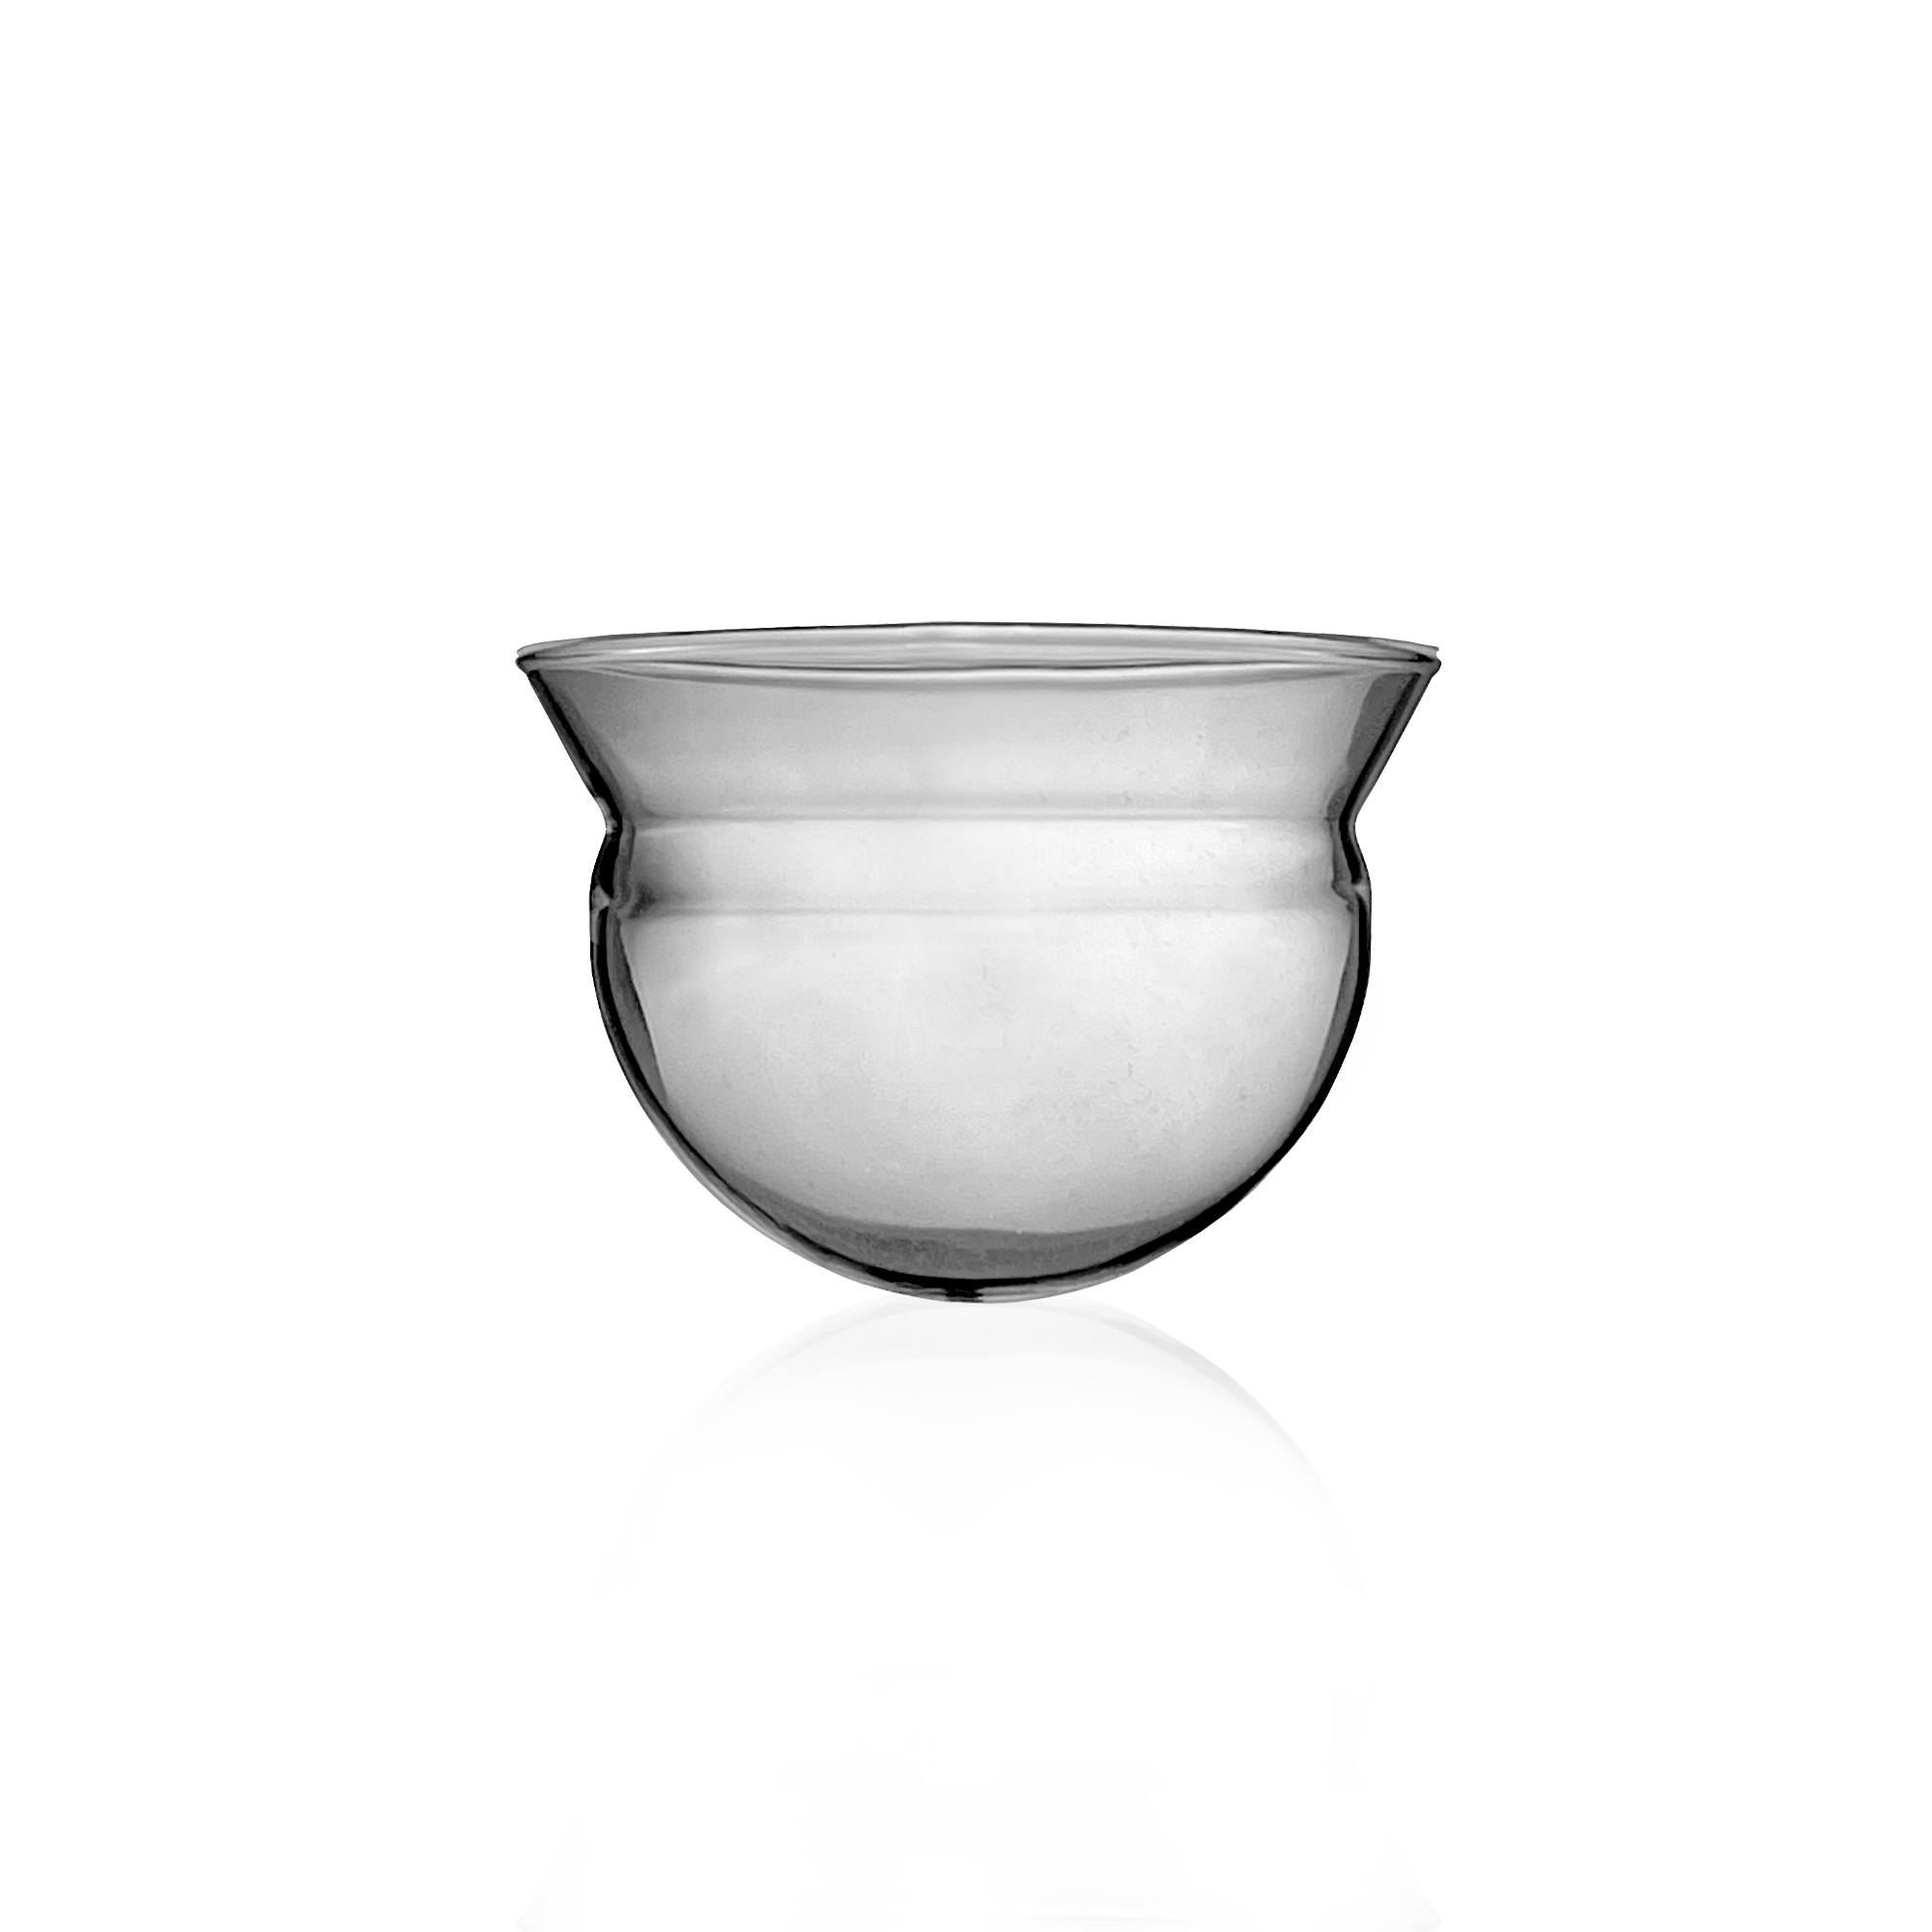 mono - filio replacement glass - teacup or sugar bowl